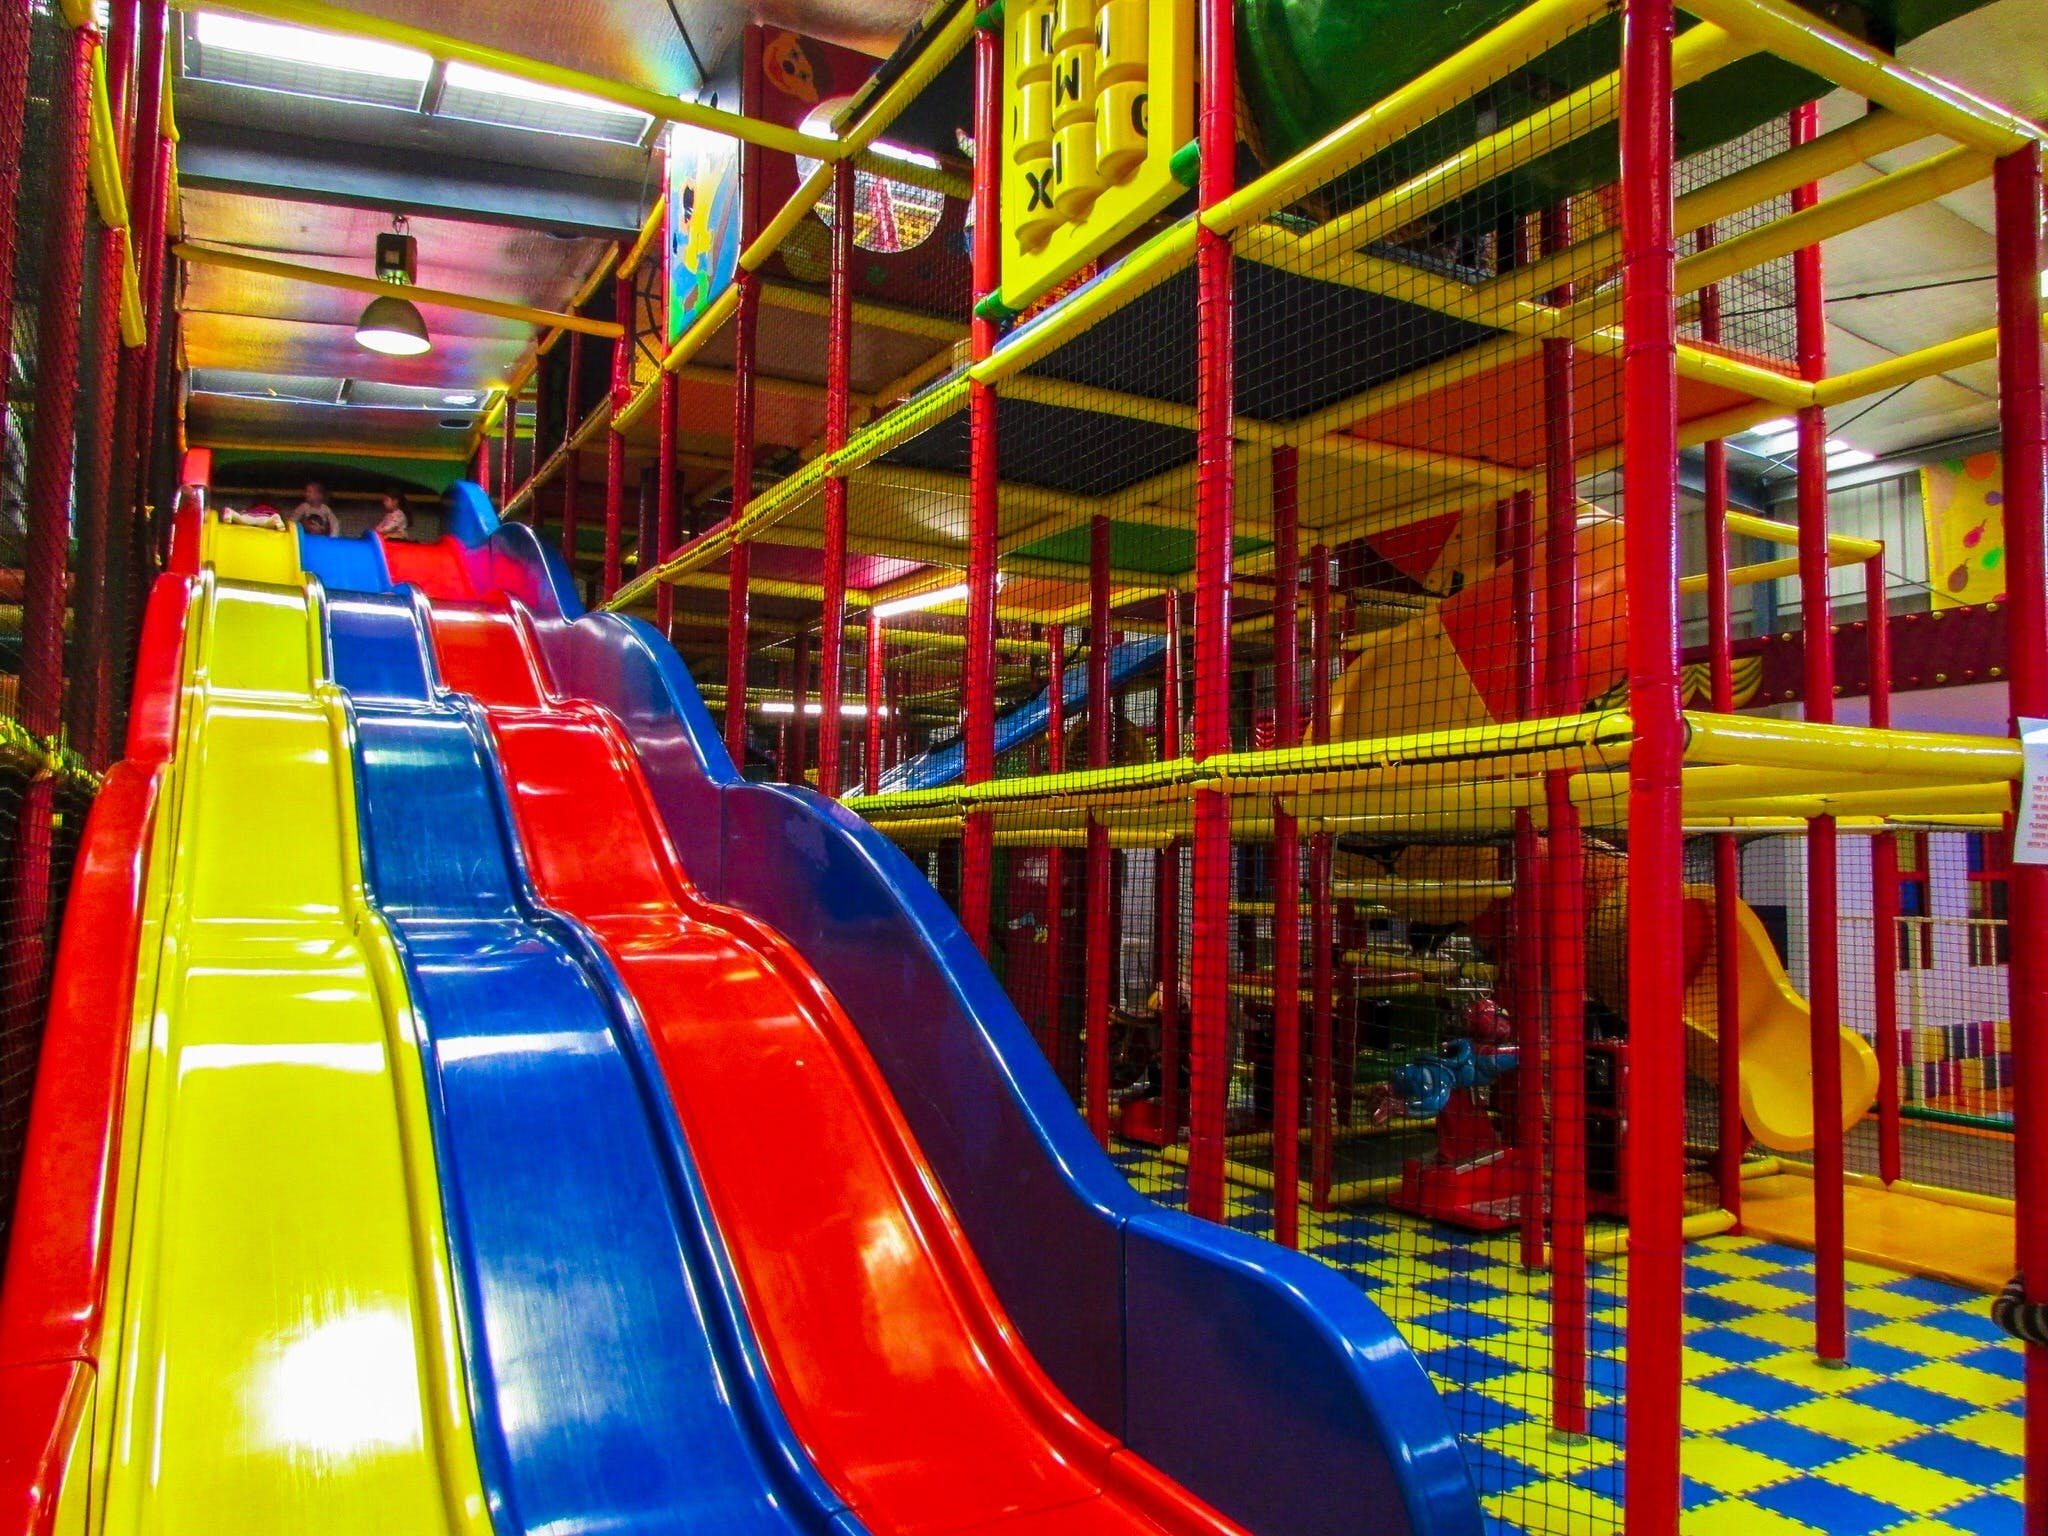 Kidz Shed Indoor Play Centre and Cafe - Accommodation in Bendigo